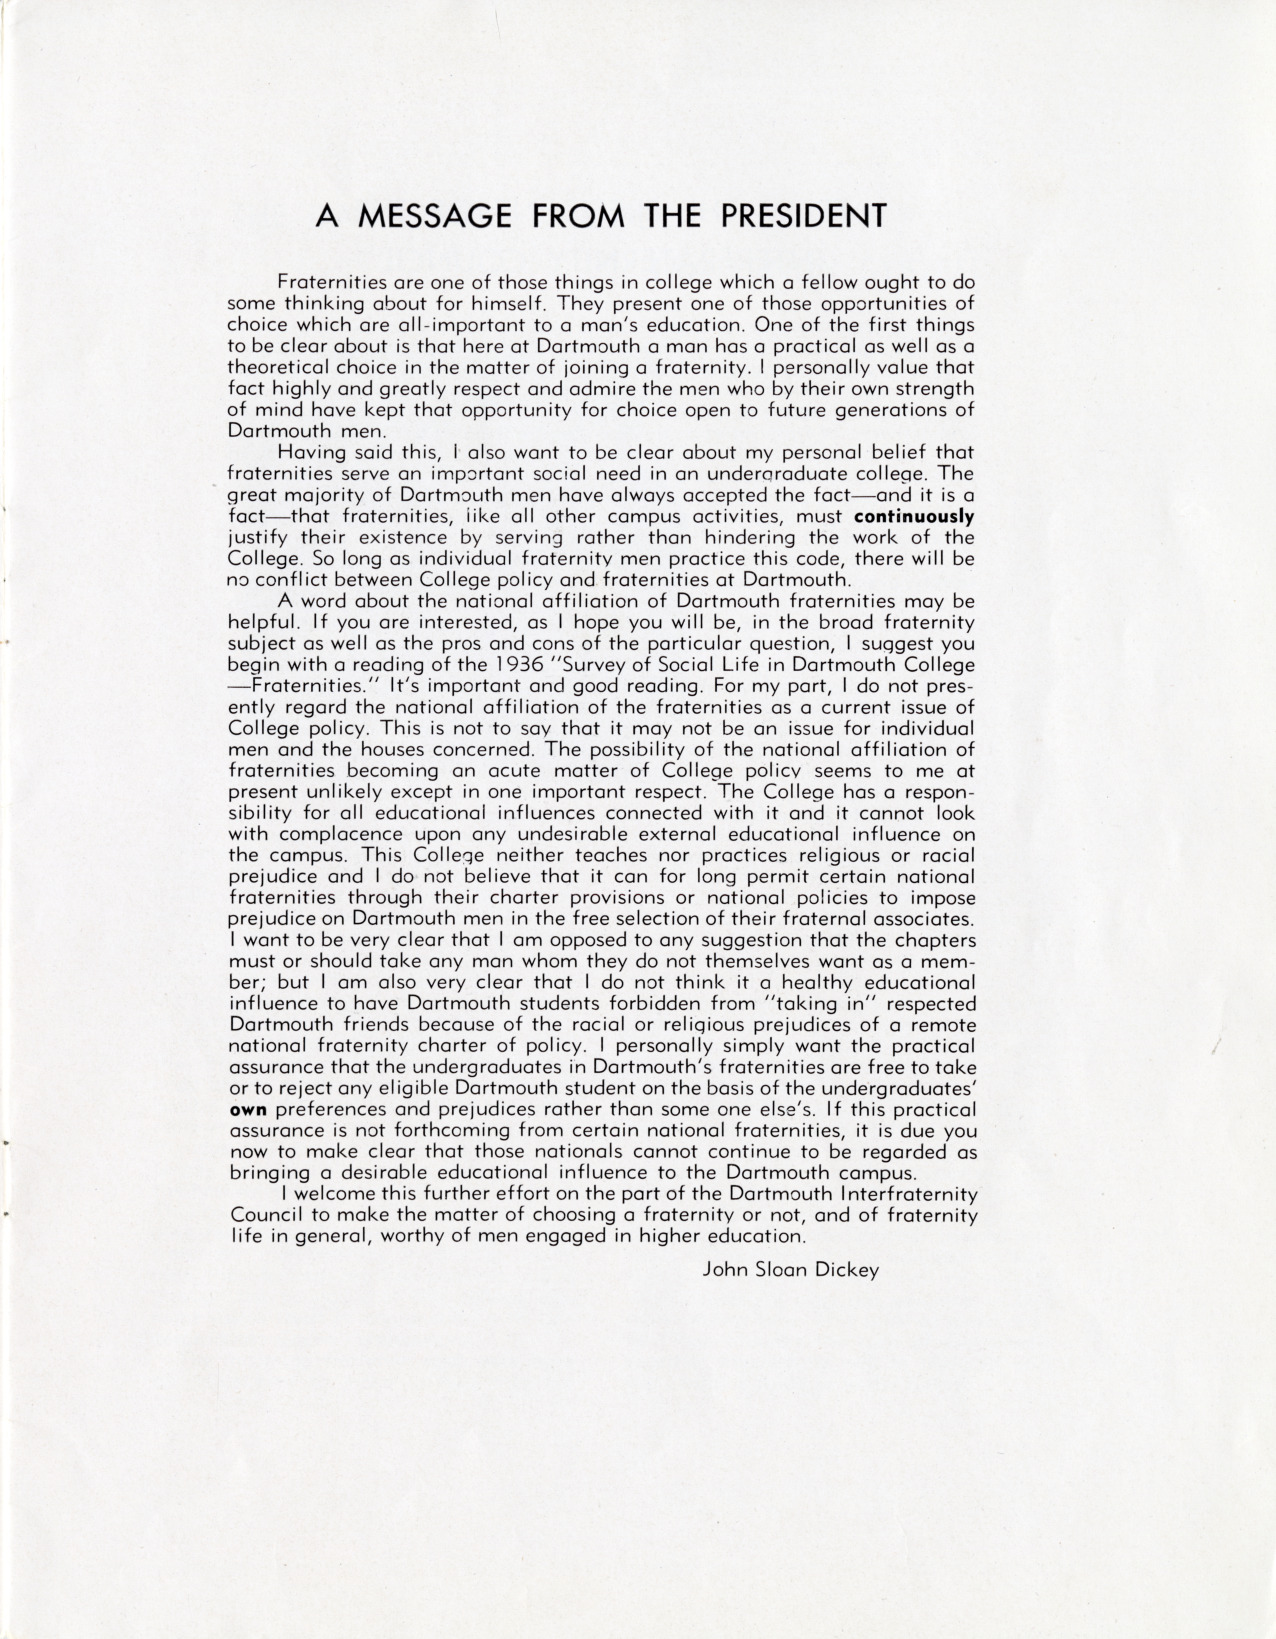 A Message from the President, 1948